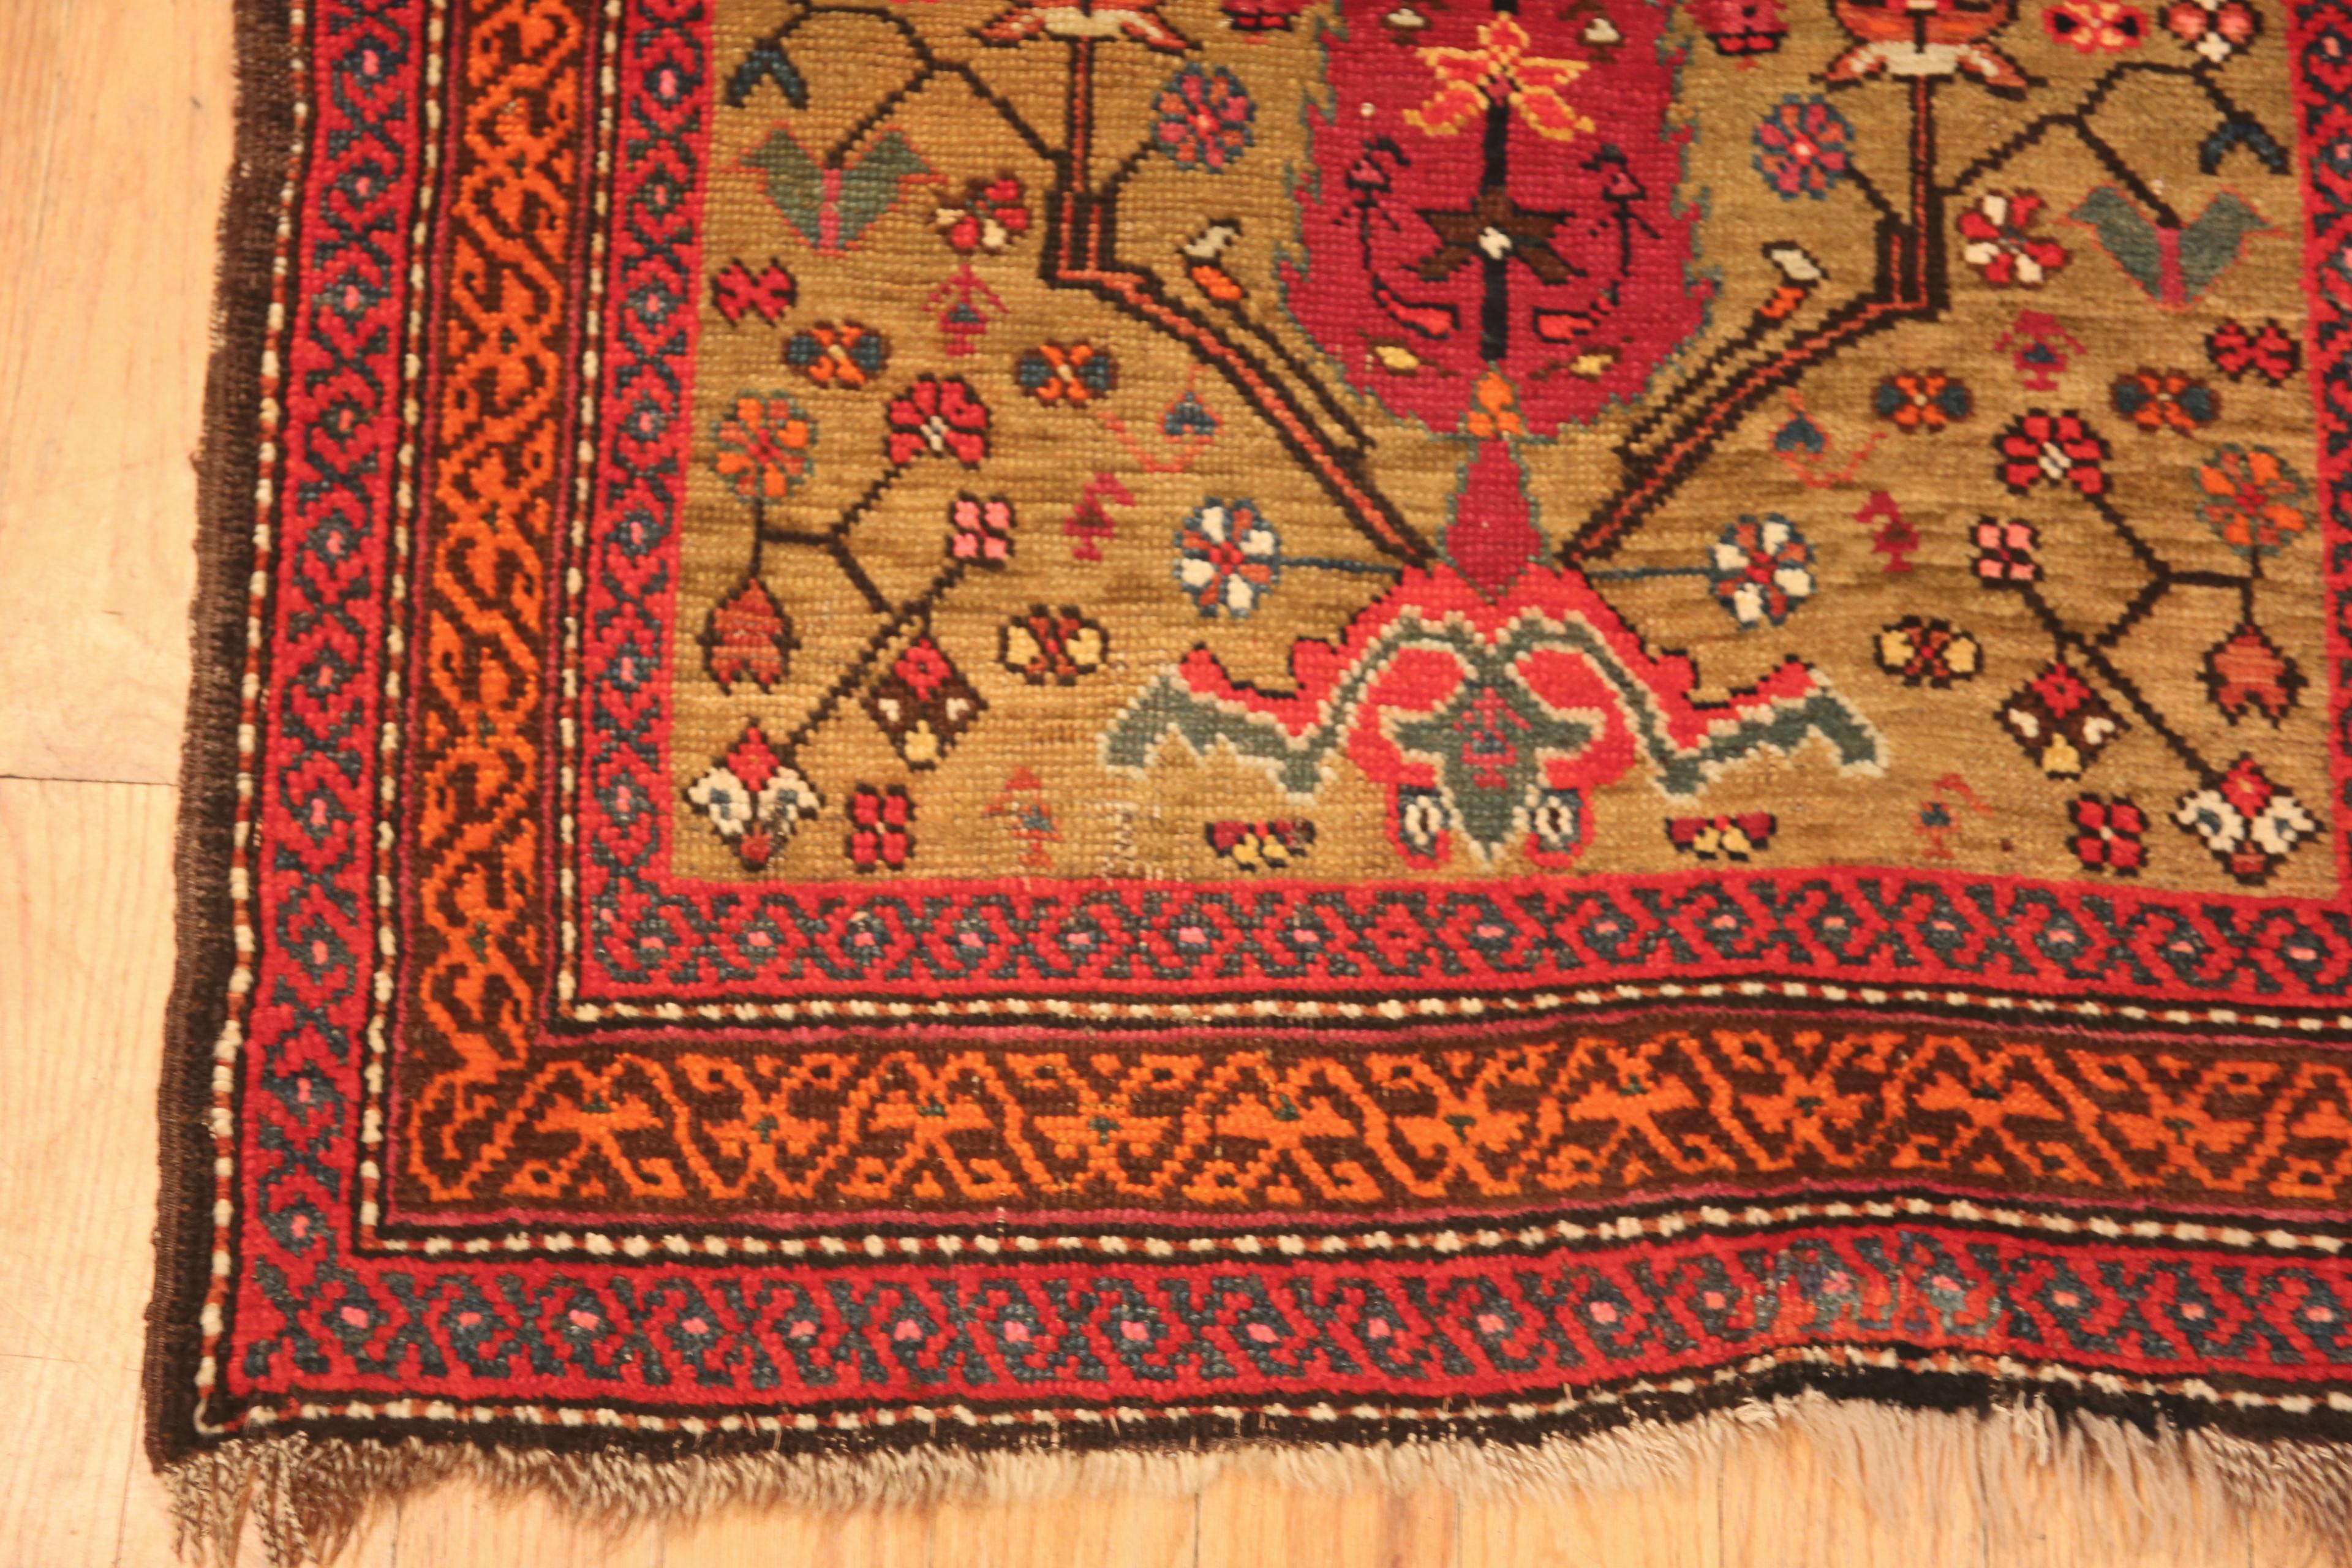 Hand-Woven Nazmiyal Collection Antique Caucasian Karabagh Runner. 3 ft x 14 ft 10 in